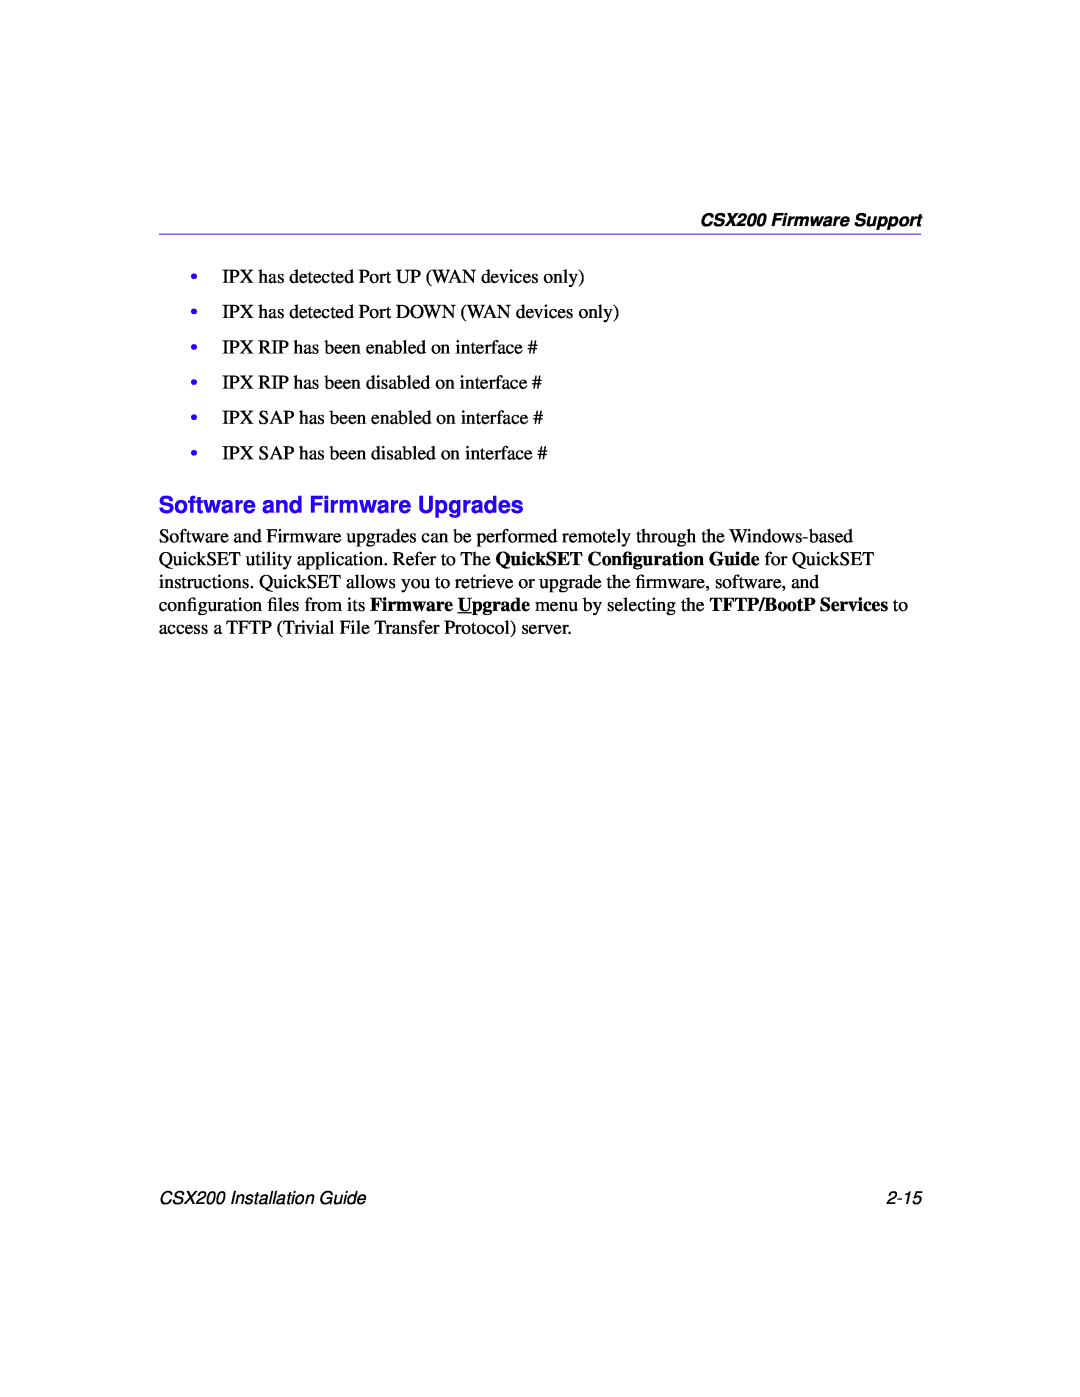 Cabletron Systems CSX200 manual Software and Firmware Upgrades 